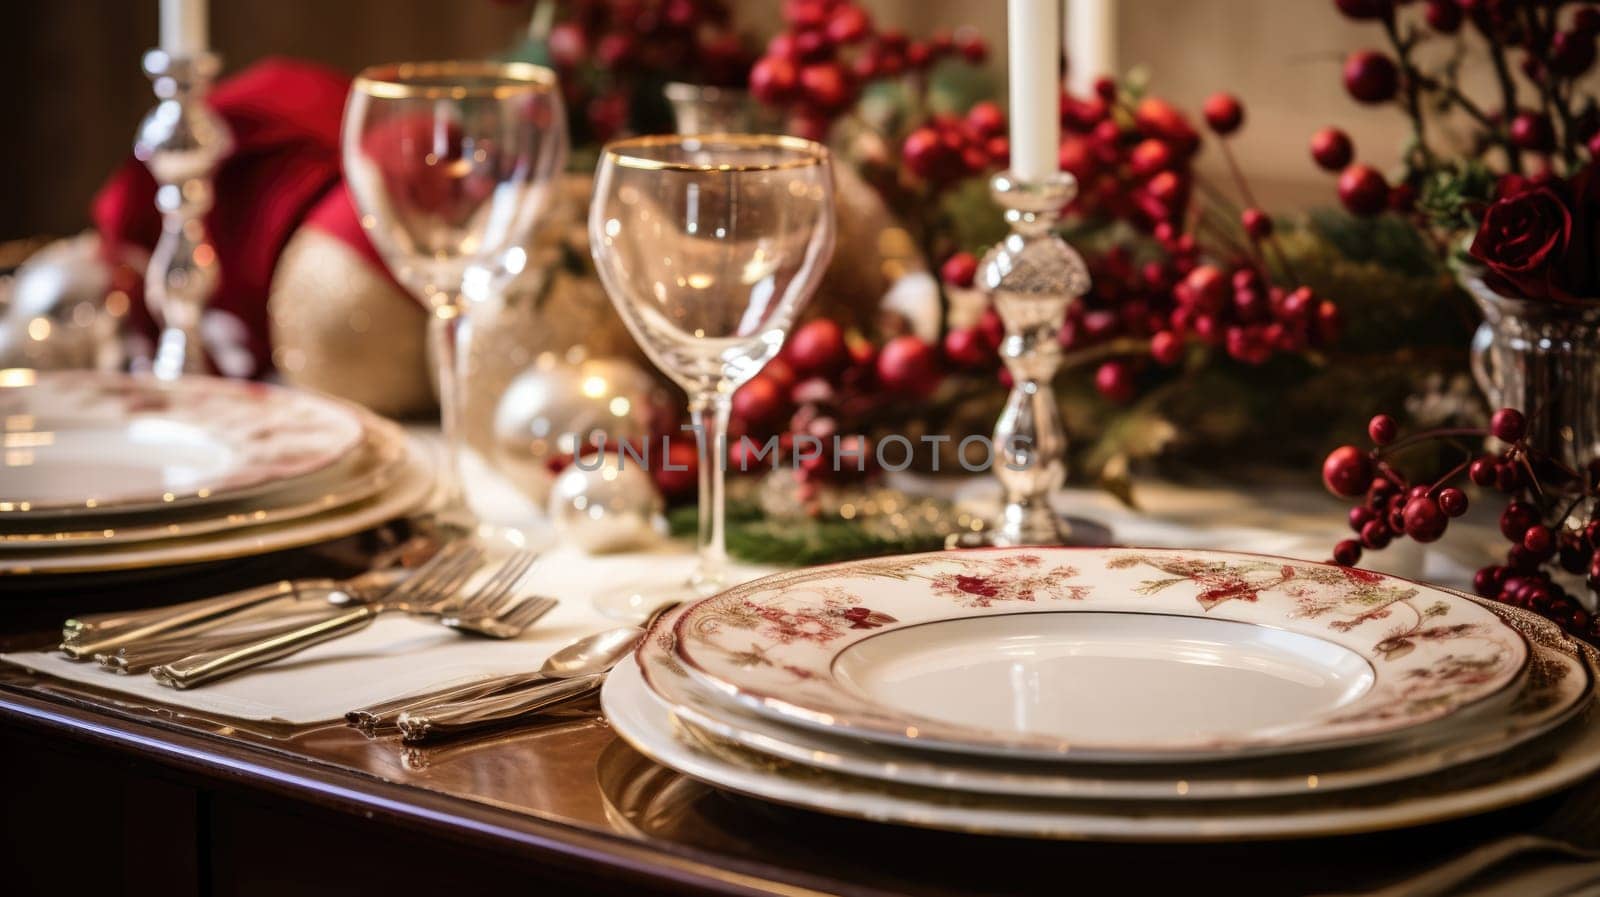 The picture of the luxury dining room that has been prepared for the ceremony, anniversary or just normal business dining that the table fill with silverware, plate, utensil and the wineglass. AIGX01.